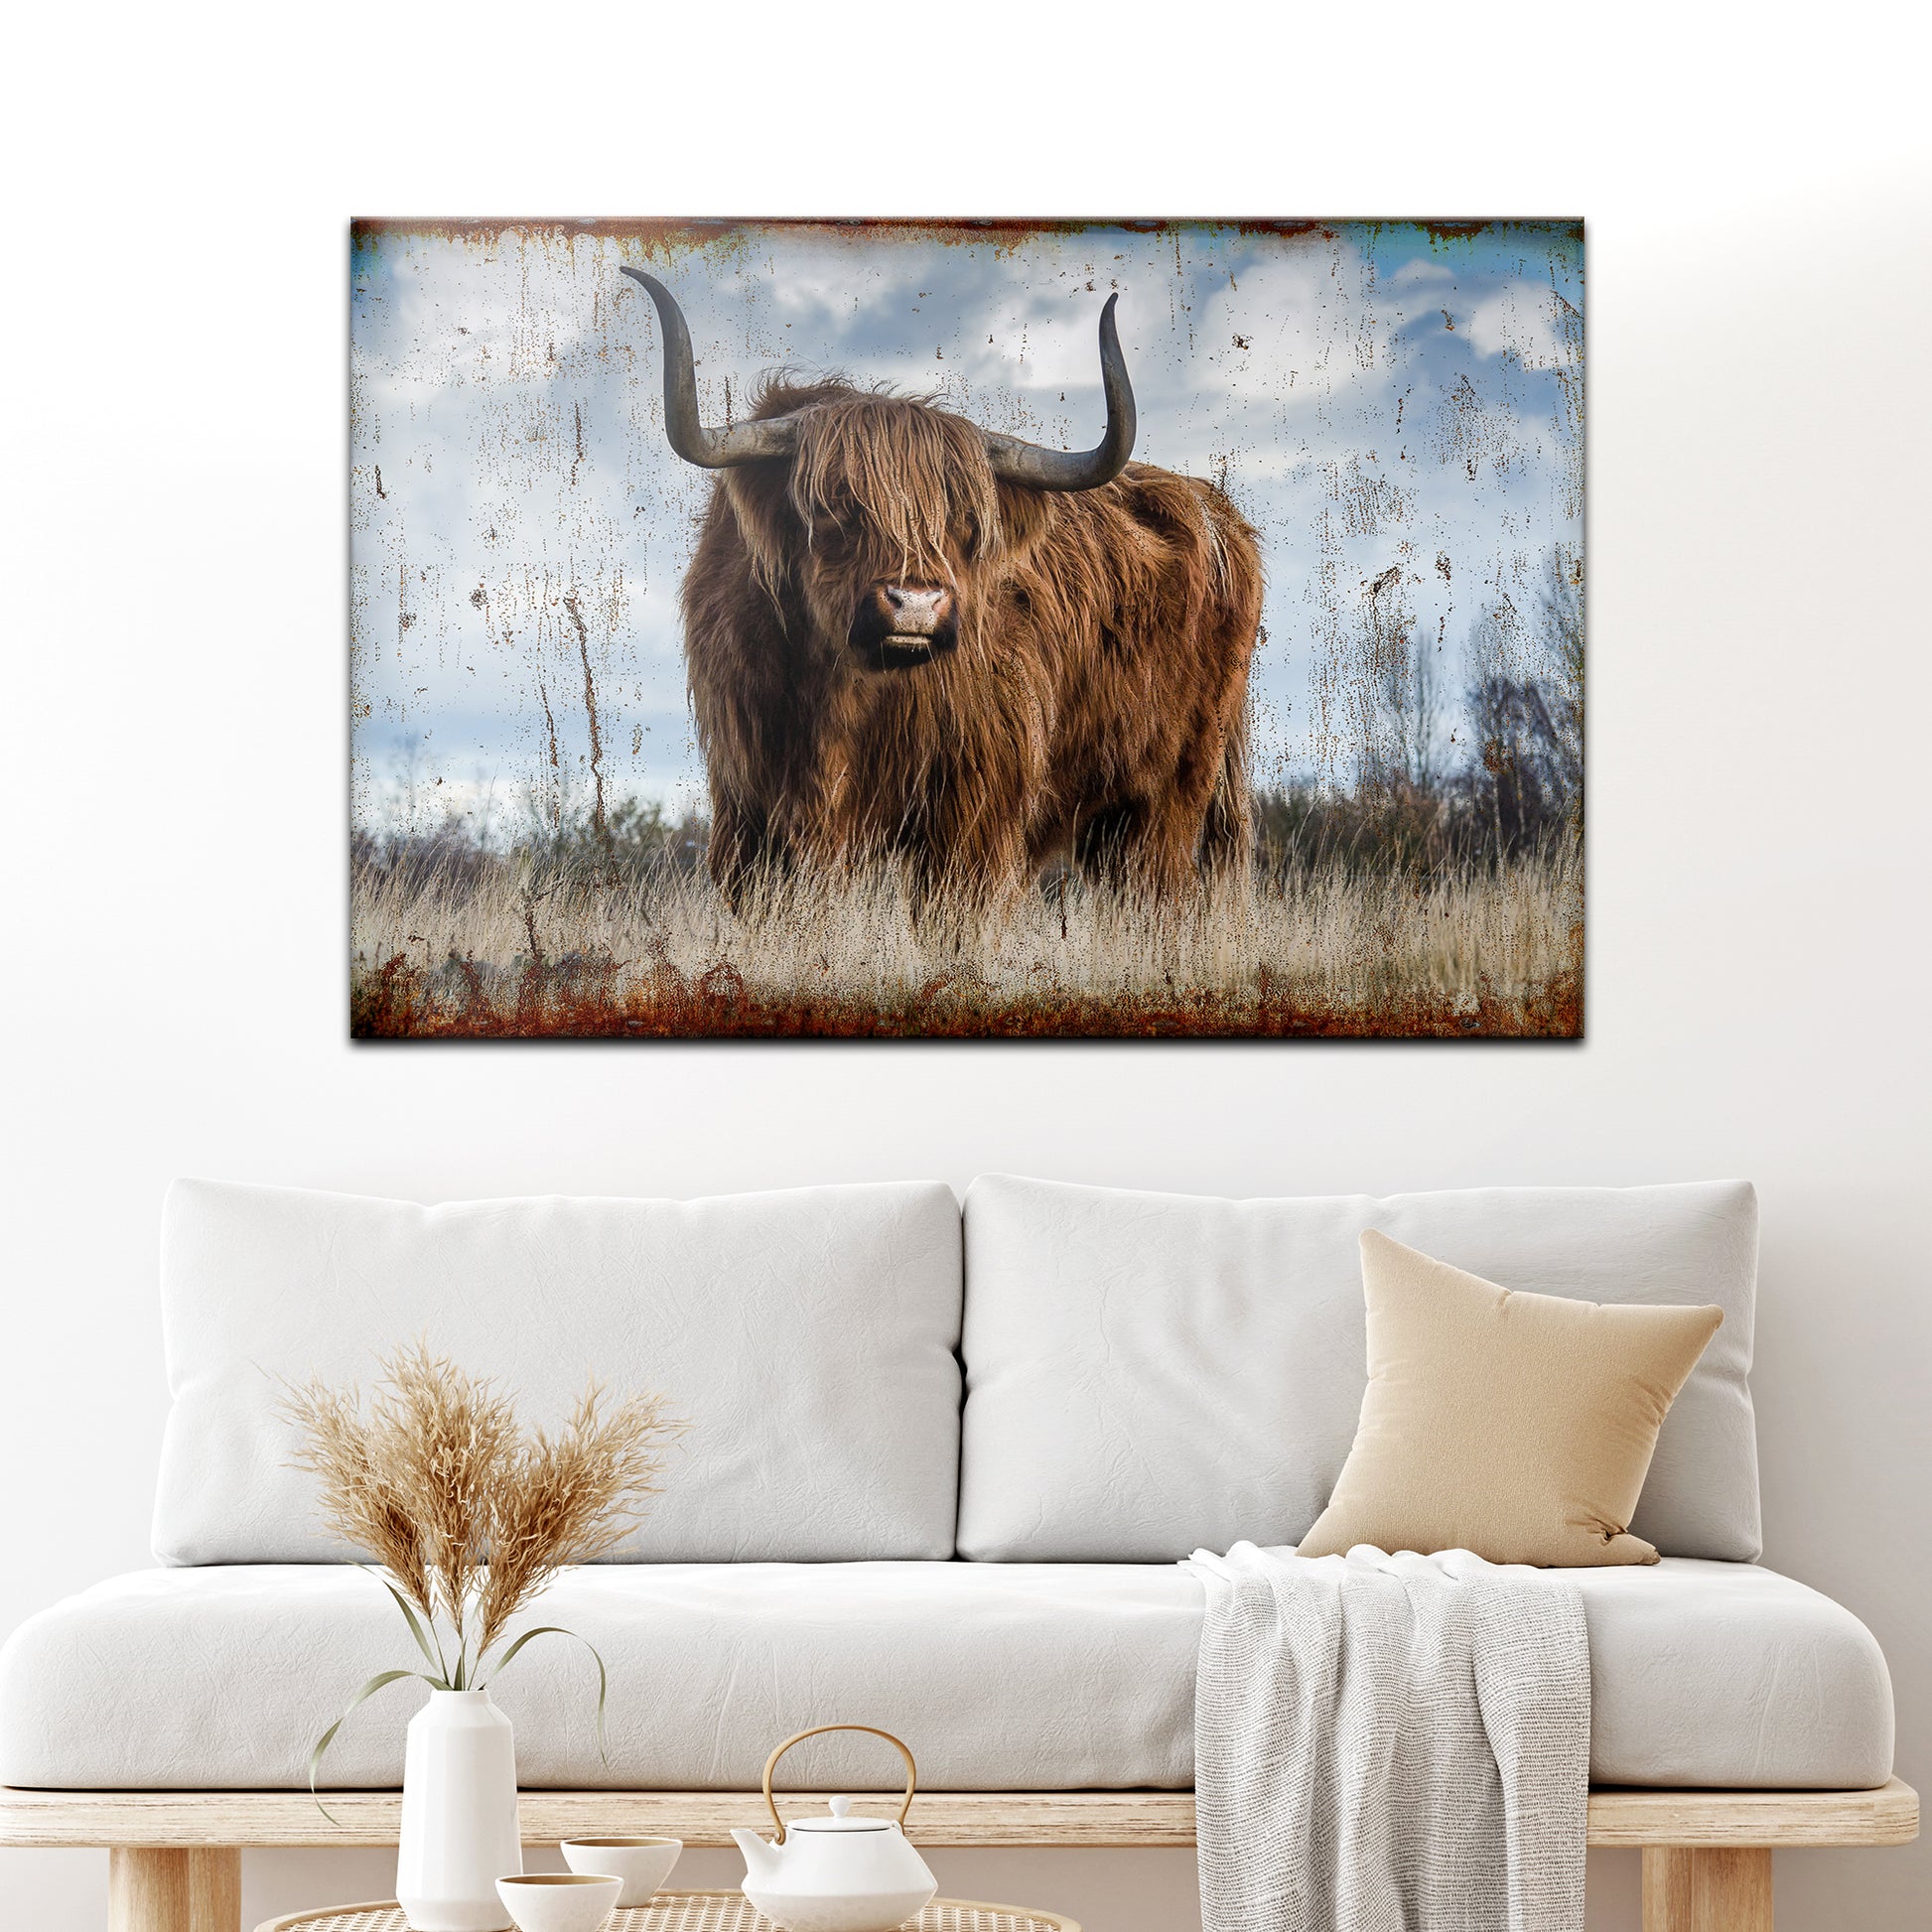 Classic Highland Cattle Canvas Wall Art - Image by Tailored Canvases